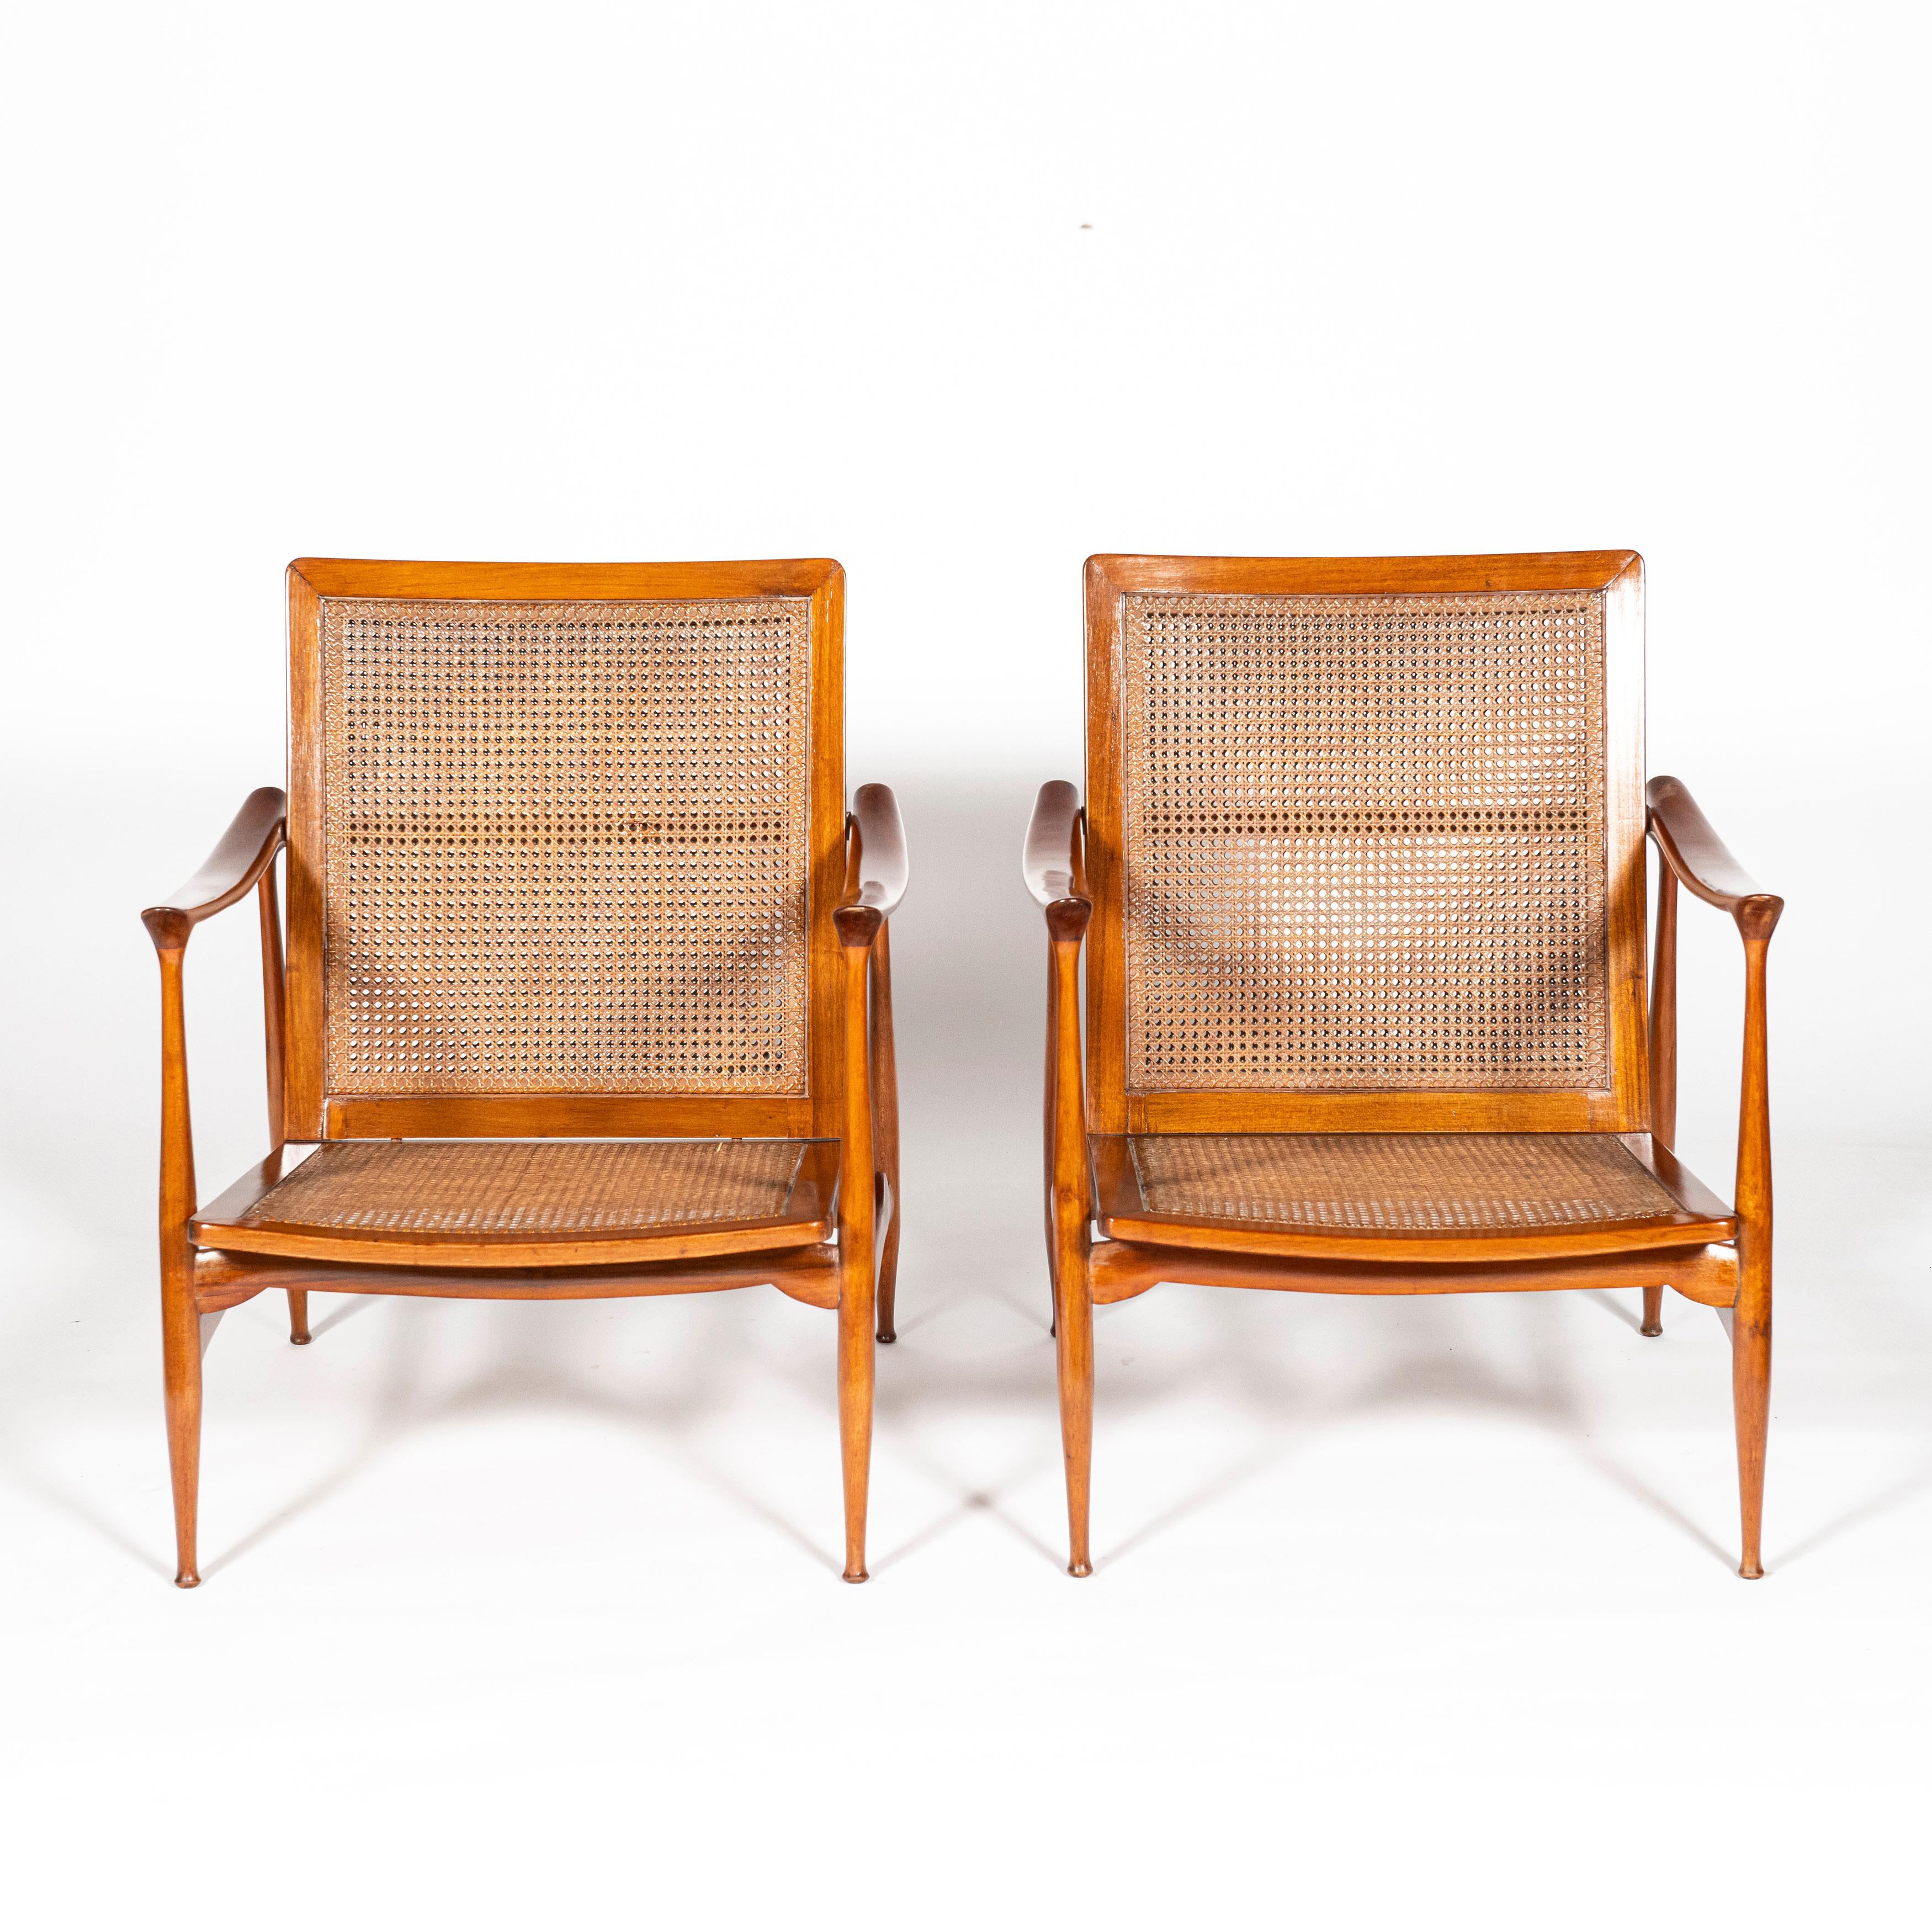 Mid-20th Century Pair of Wood, Rattan and Leather Scandinavian Armchairs, circa 1960 For Sale